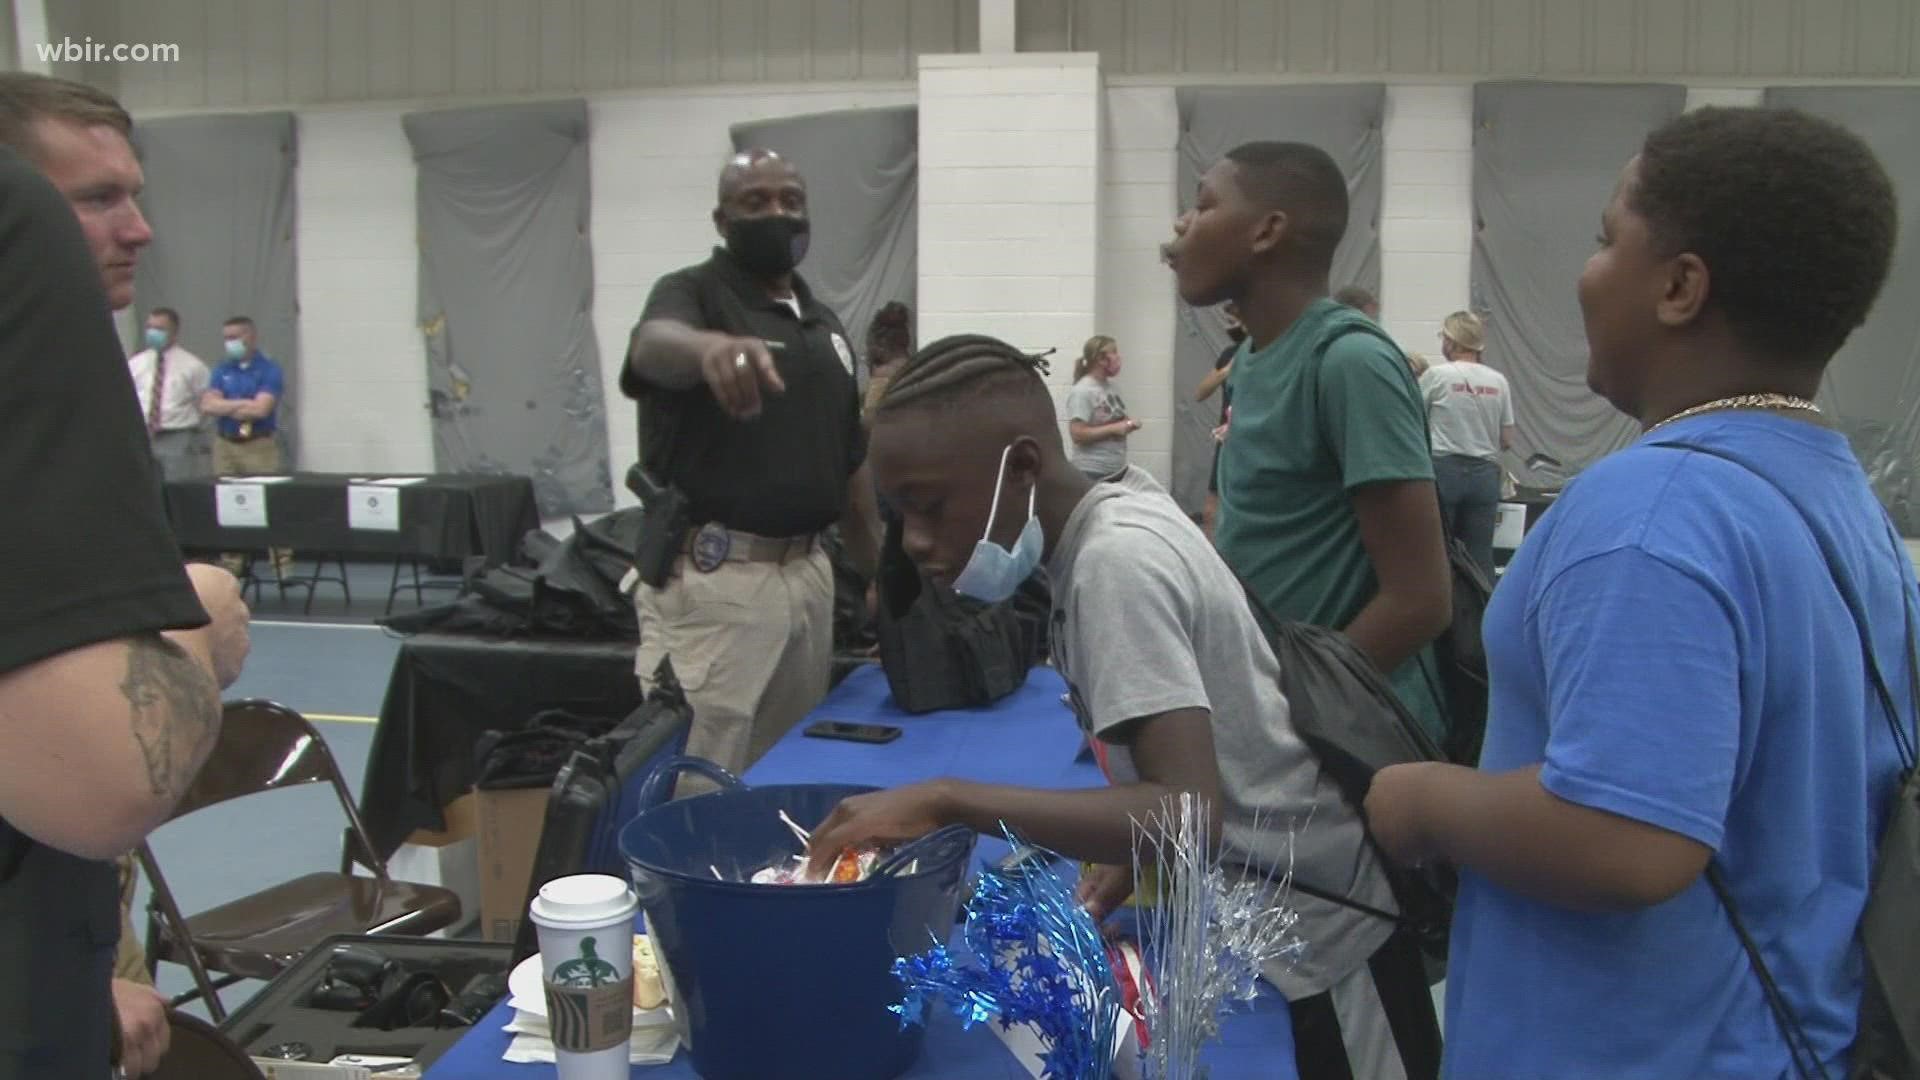 Students had the chance to pick up some free books, and leaders from every Oak Ridge school and the police department attended the event to get students excited.